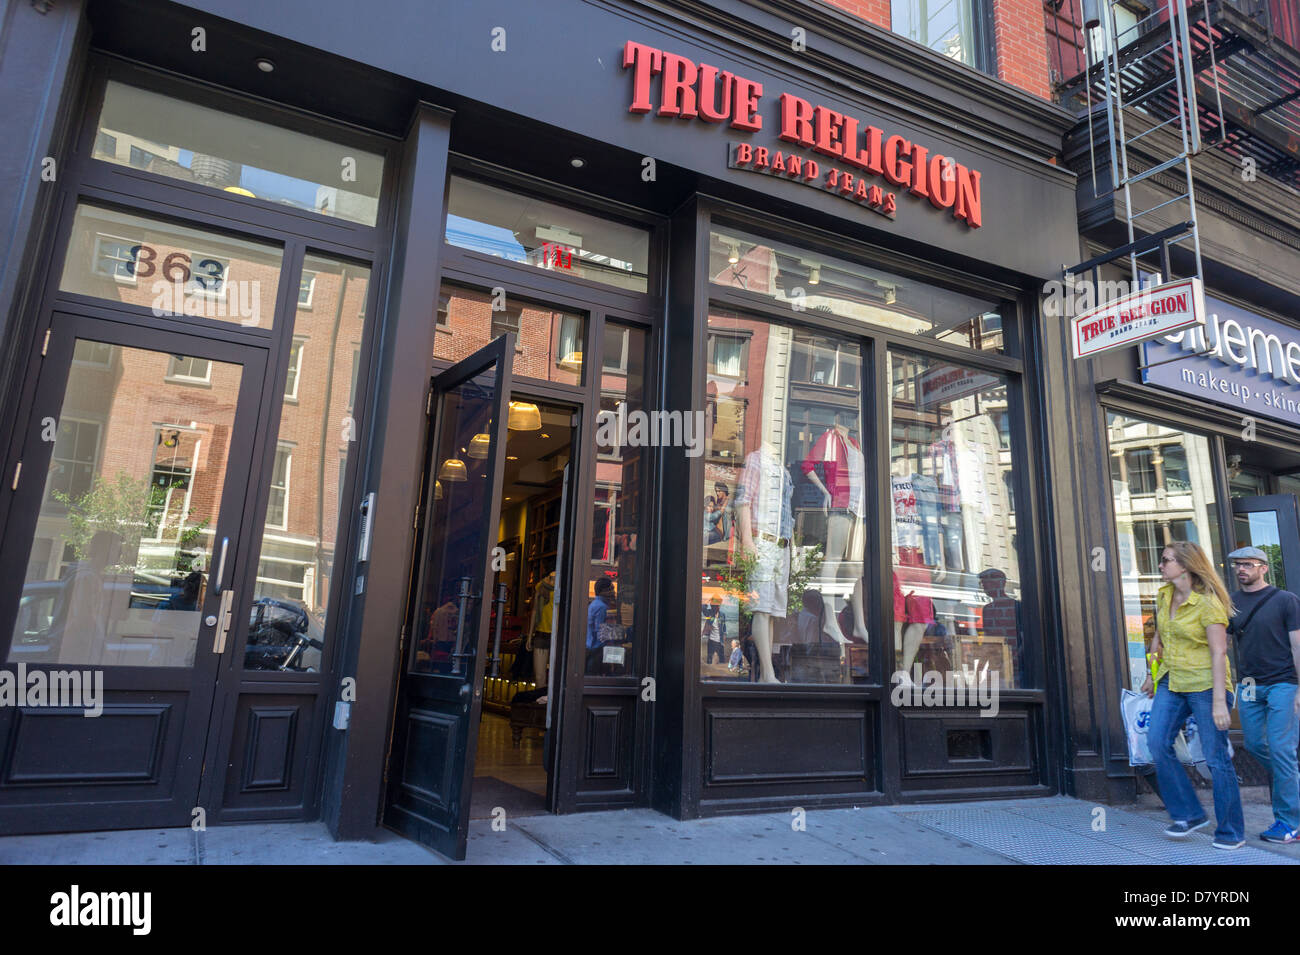 True Religion Clothing High Resolution Stock Photography and Images - Alamy